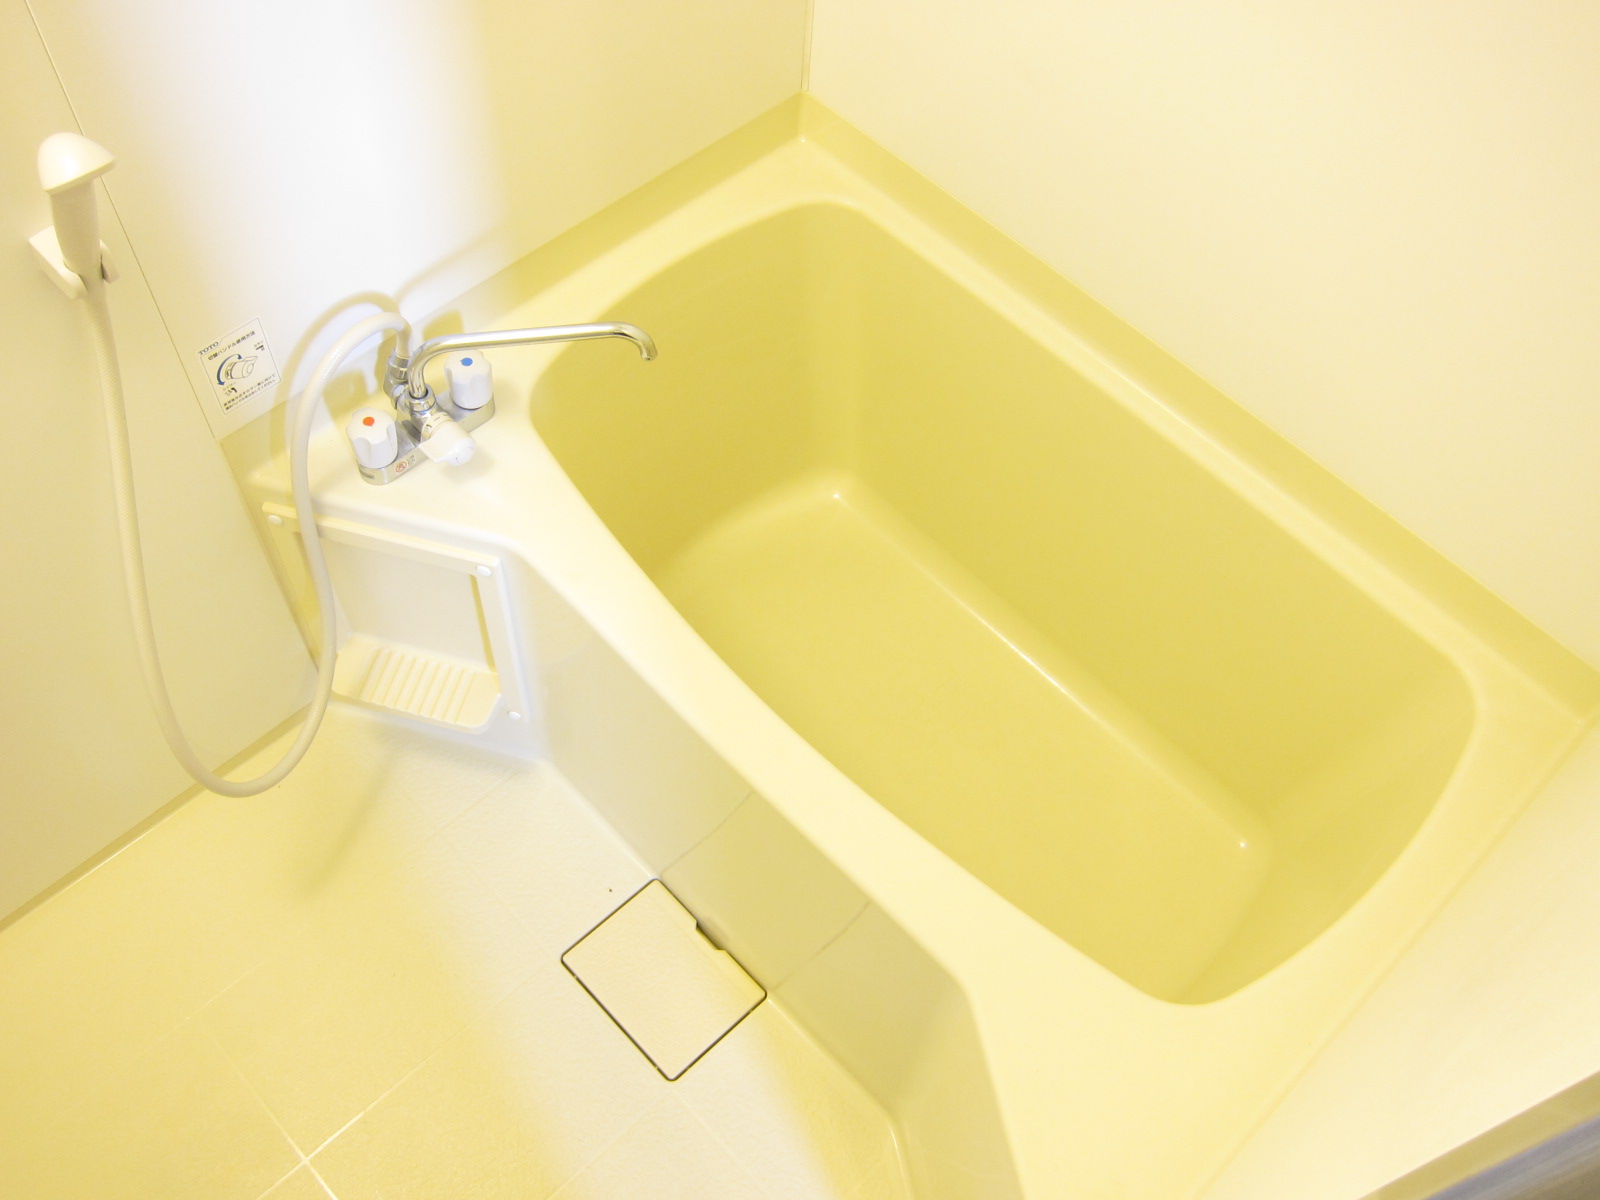 Bath. It is easy to use and widely bathrooms